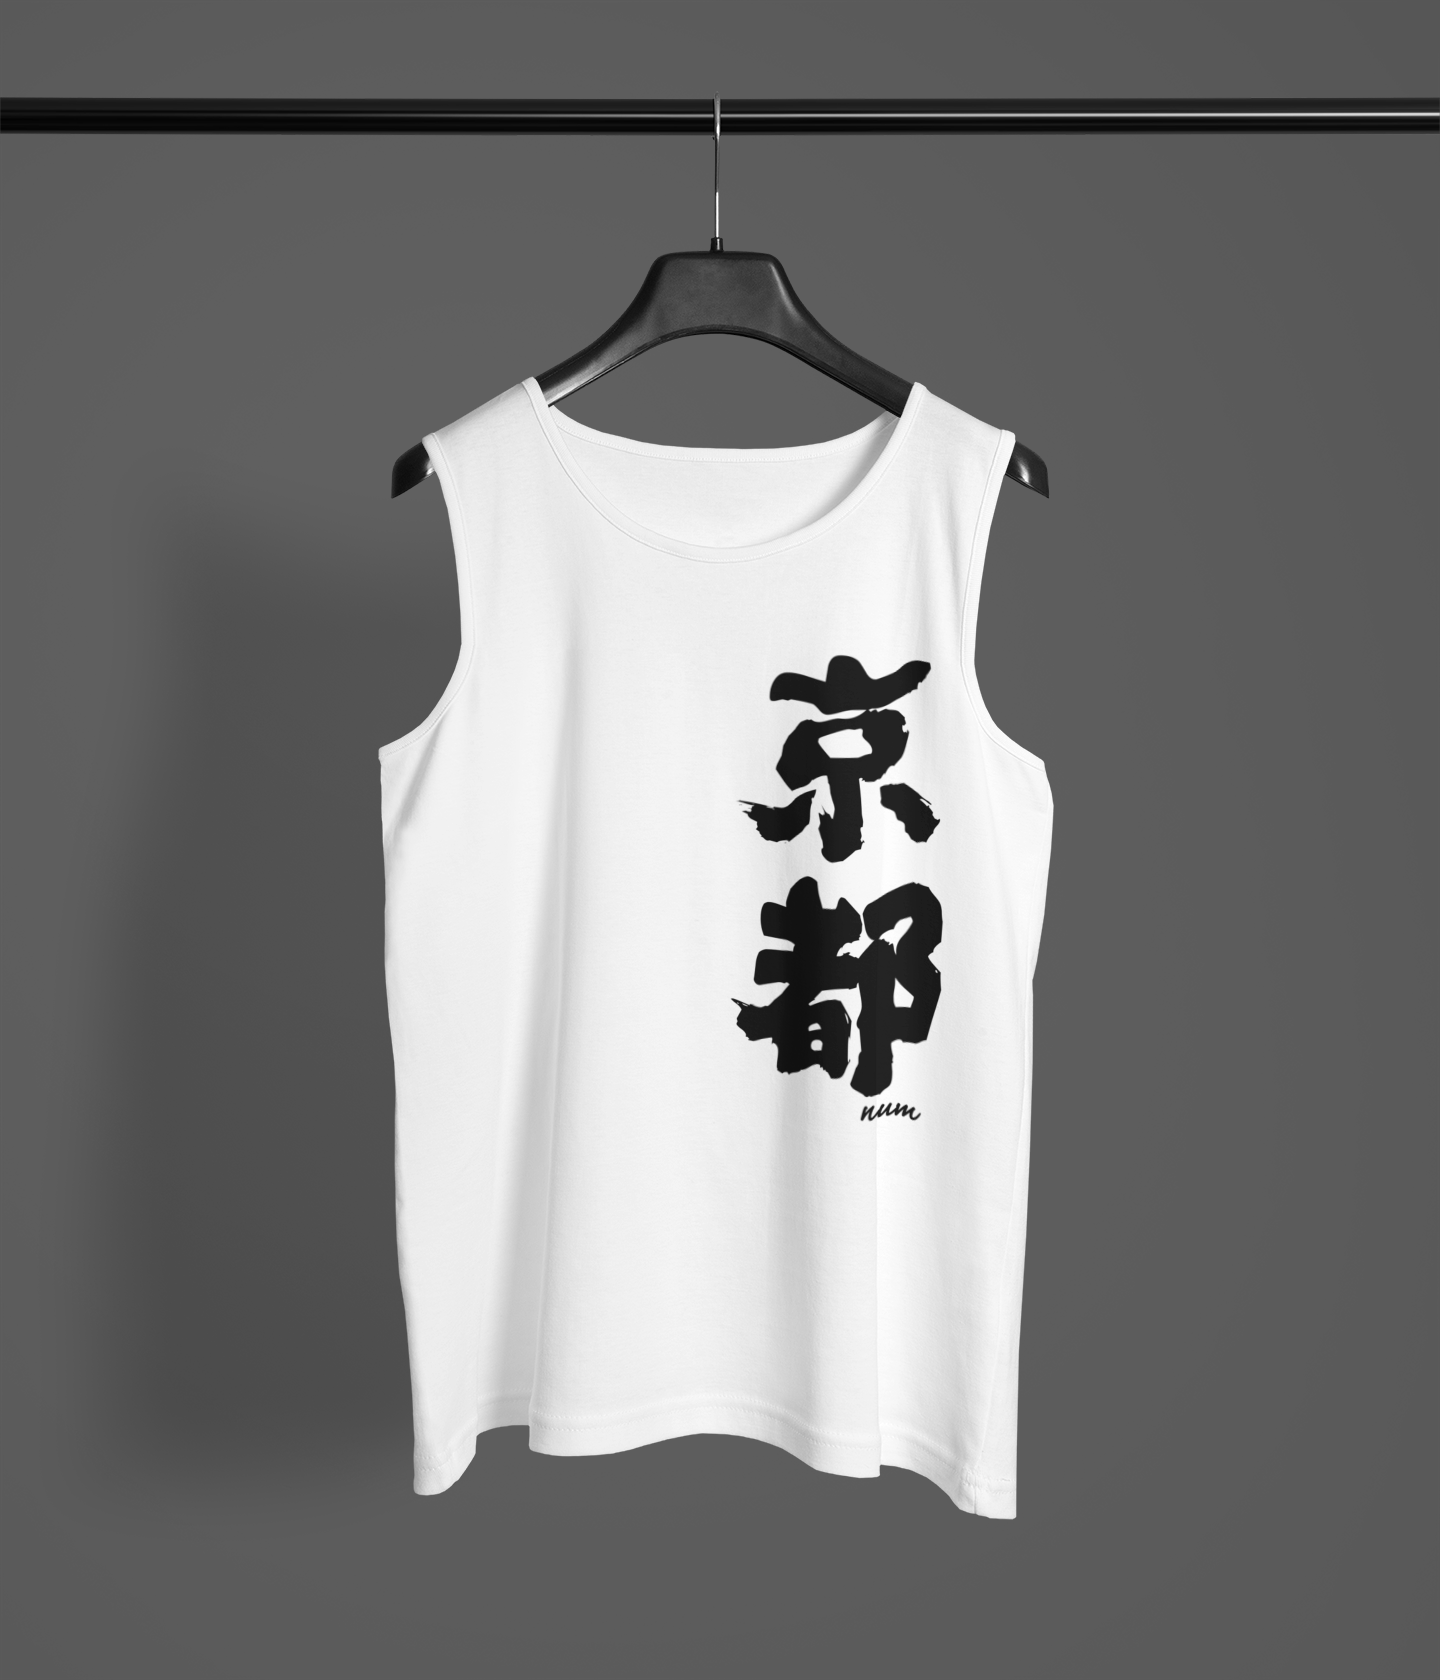 mockup-featuring-a-men-s-tank-top-hanging-from-a-dark-metal-pipe-1986-el1 (5).png